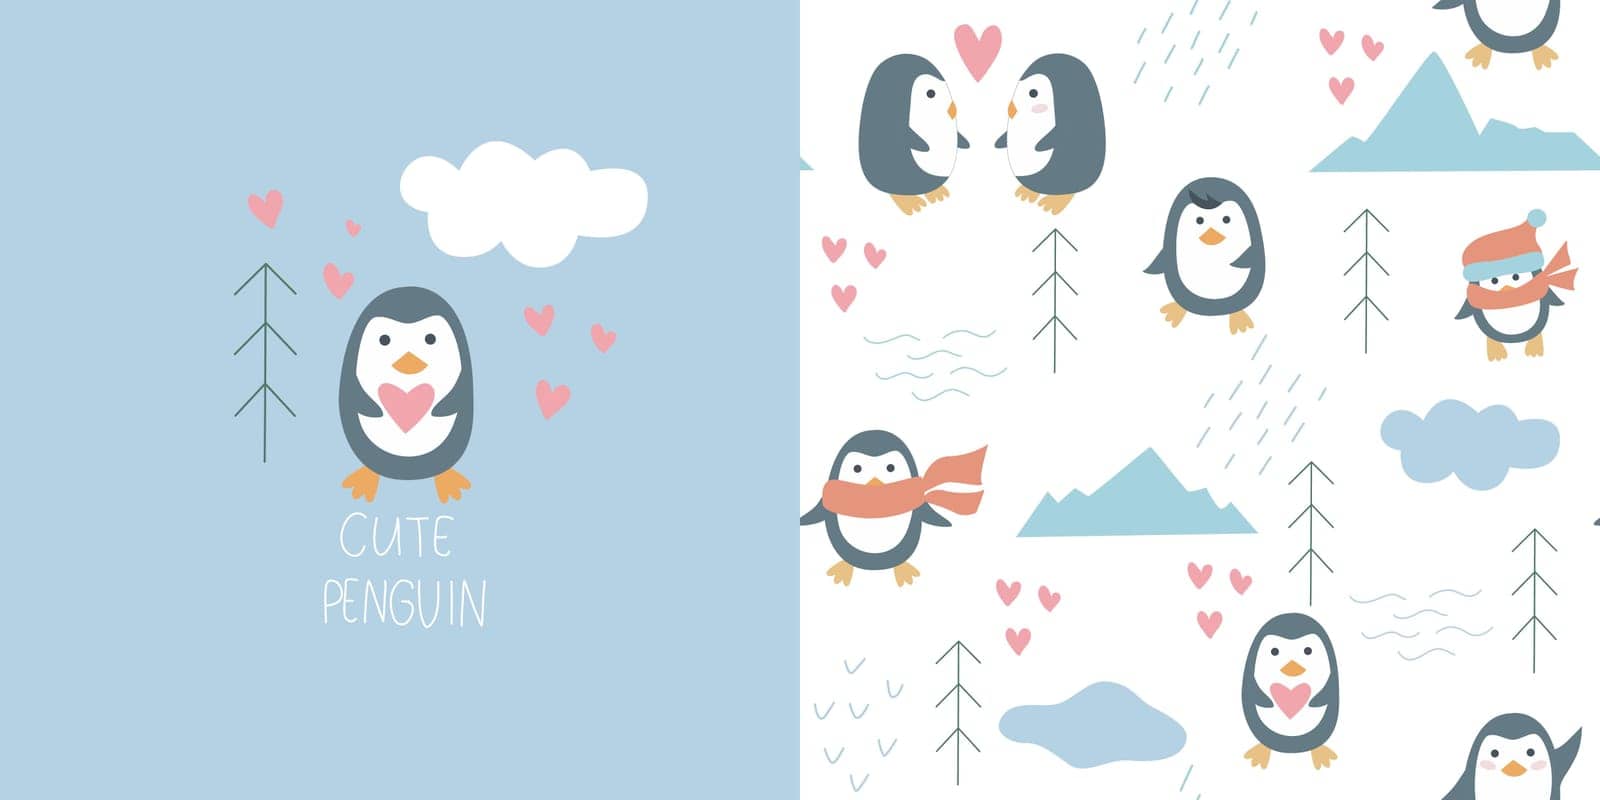 Cute penguins of Antarctica seamless pattern. Funny baby characters background and postcard. Hand drawn northern birds among the ice floes and the ocean. Print for kid textiles, wallpaper, packaging and design, vector illustration